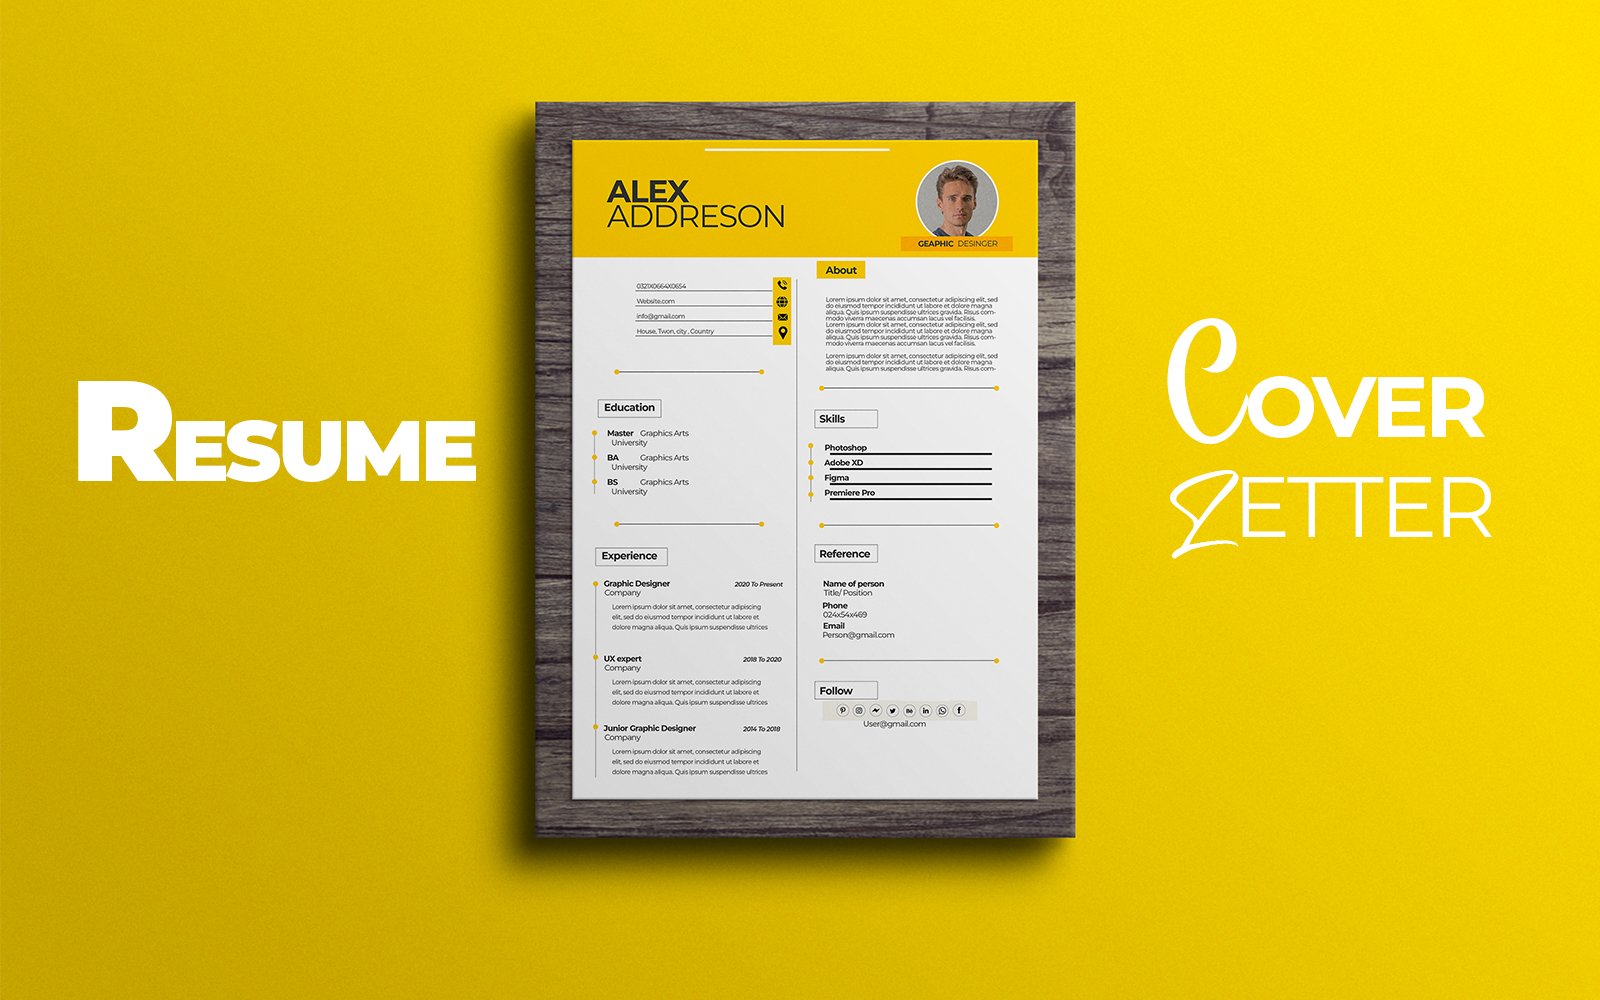 Template #323305 Resume Coverletter Webdesign Template - Logo template Preview